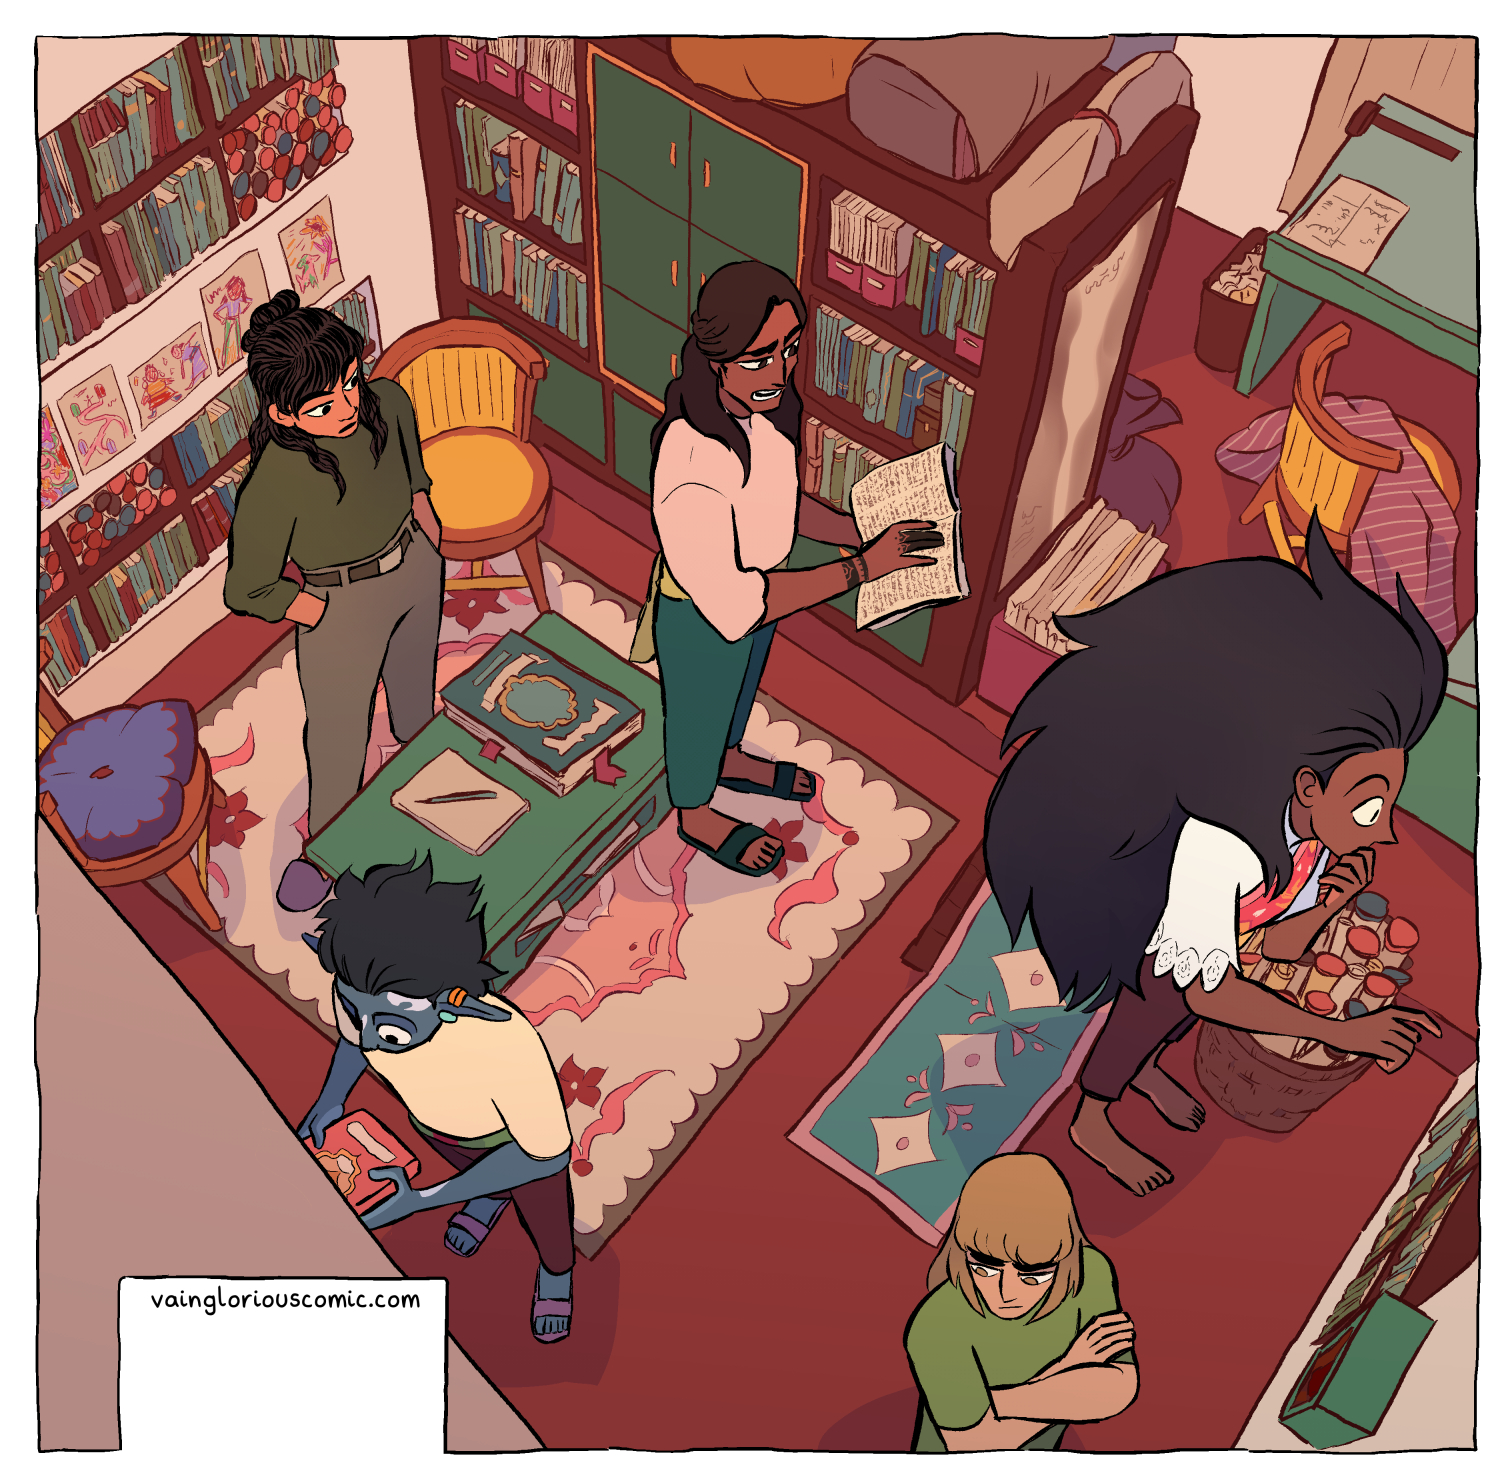 Crop of panel 1. Mercury, Von, Hammer, and Rei stand in the house's library, looking at various books while Ash talks to them.